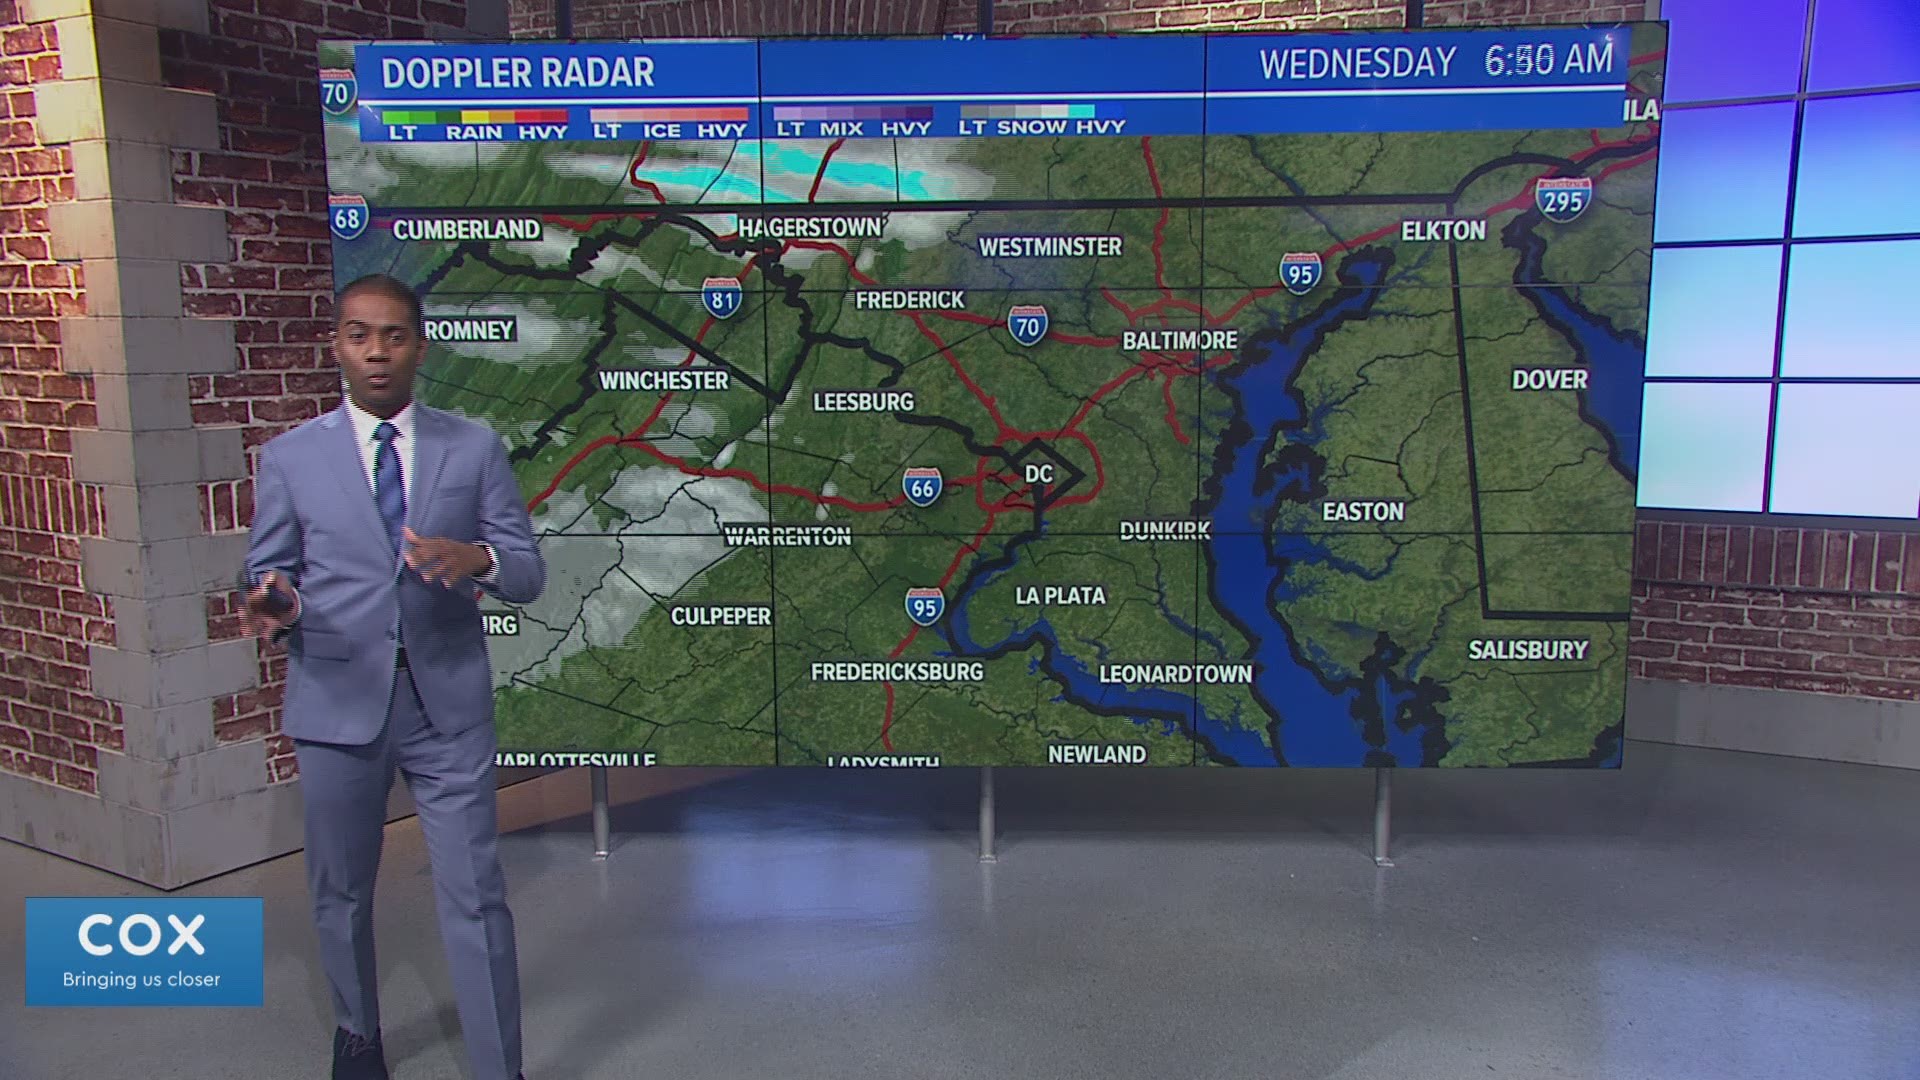 There were snow squalls Wednesday morning in the DMV. Meteorologist Chester Lampkin explains what they are and what a Snow Squall Warning means.